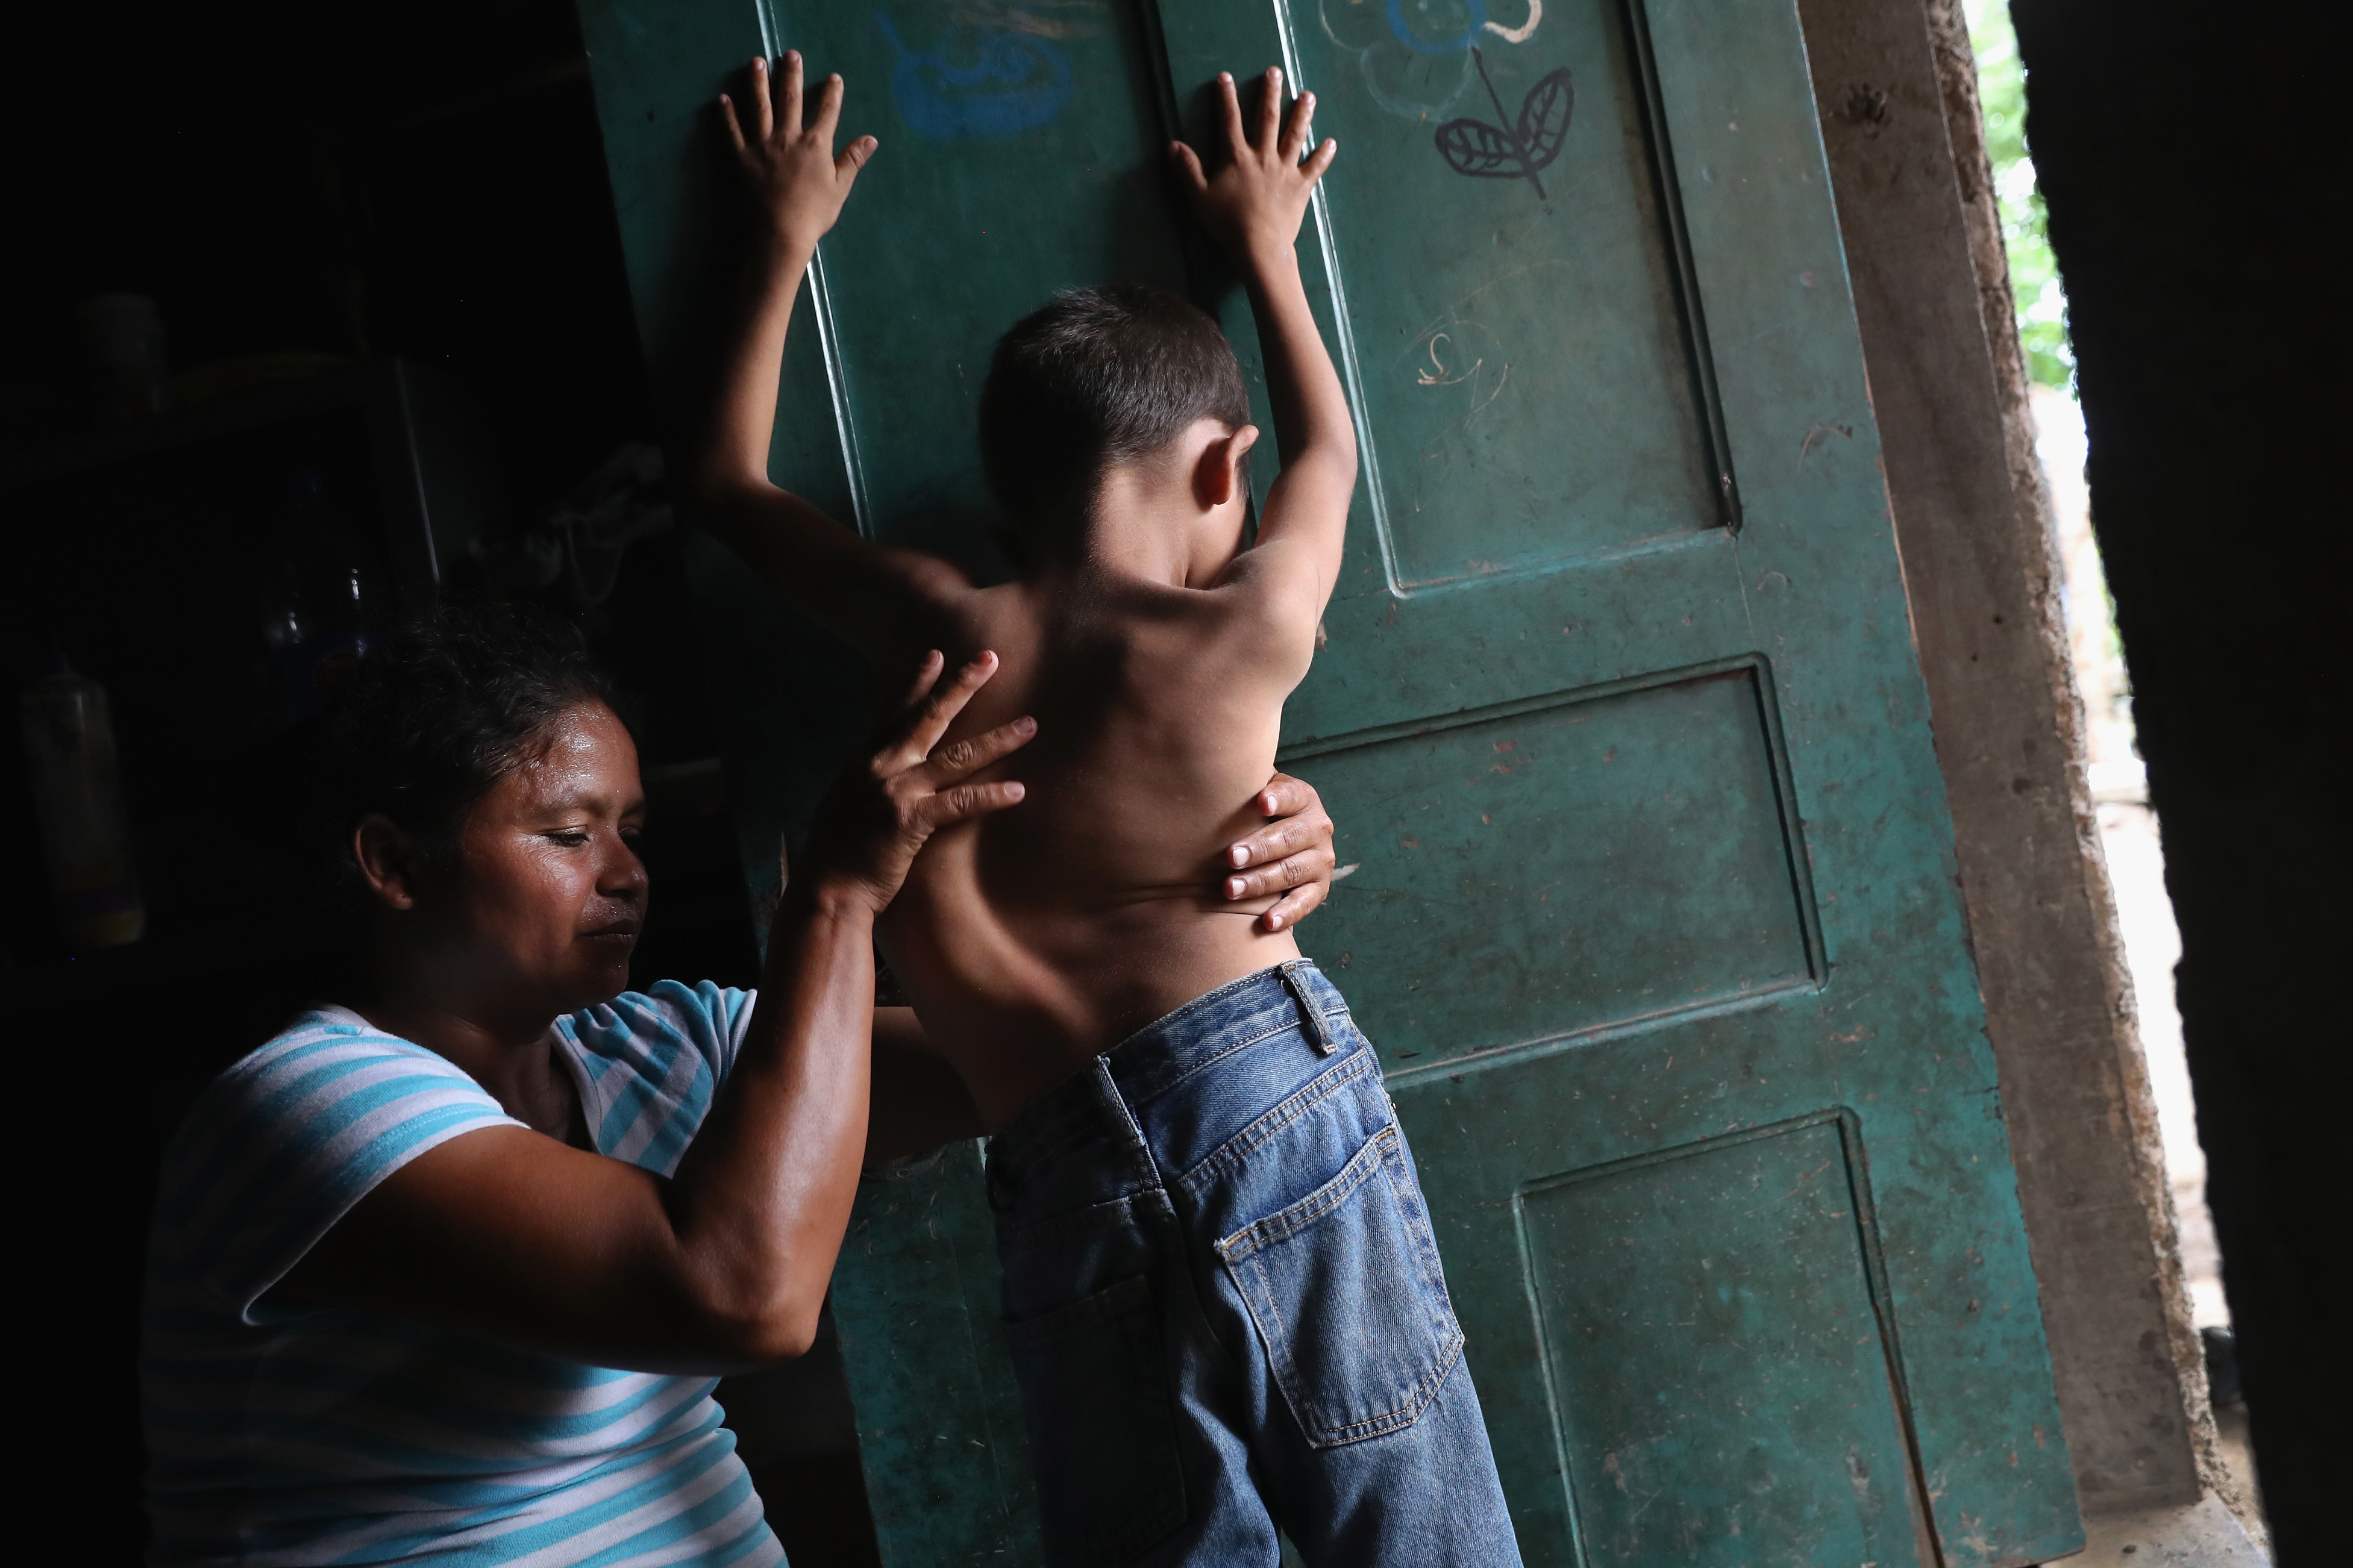 Sonia Morales massages the back of her son Jose Issac Morales, 11, at the door of their one-room home in San Pedro Sula, Honduras on Aug. 20, 2017. The mother of three said that her son's spinal deformation began at age four, but has never been able to afford the $6,000 surgery to correct his spinal condition. The boy's father, Issac Morales, 30, said he tried to immigrate to the U.S. in 2016 to work and send money home but was picked up by U.S. Border Patrol officers in the Arizona desert and deported back to Honduras. (John Moore—Getty Images)